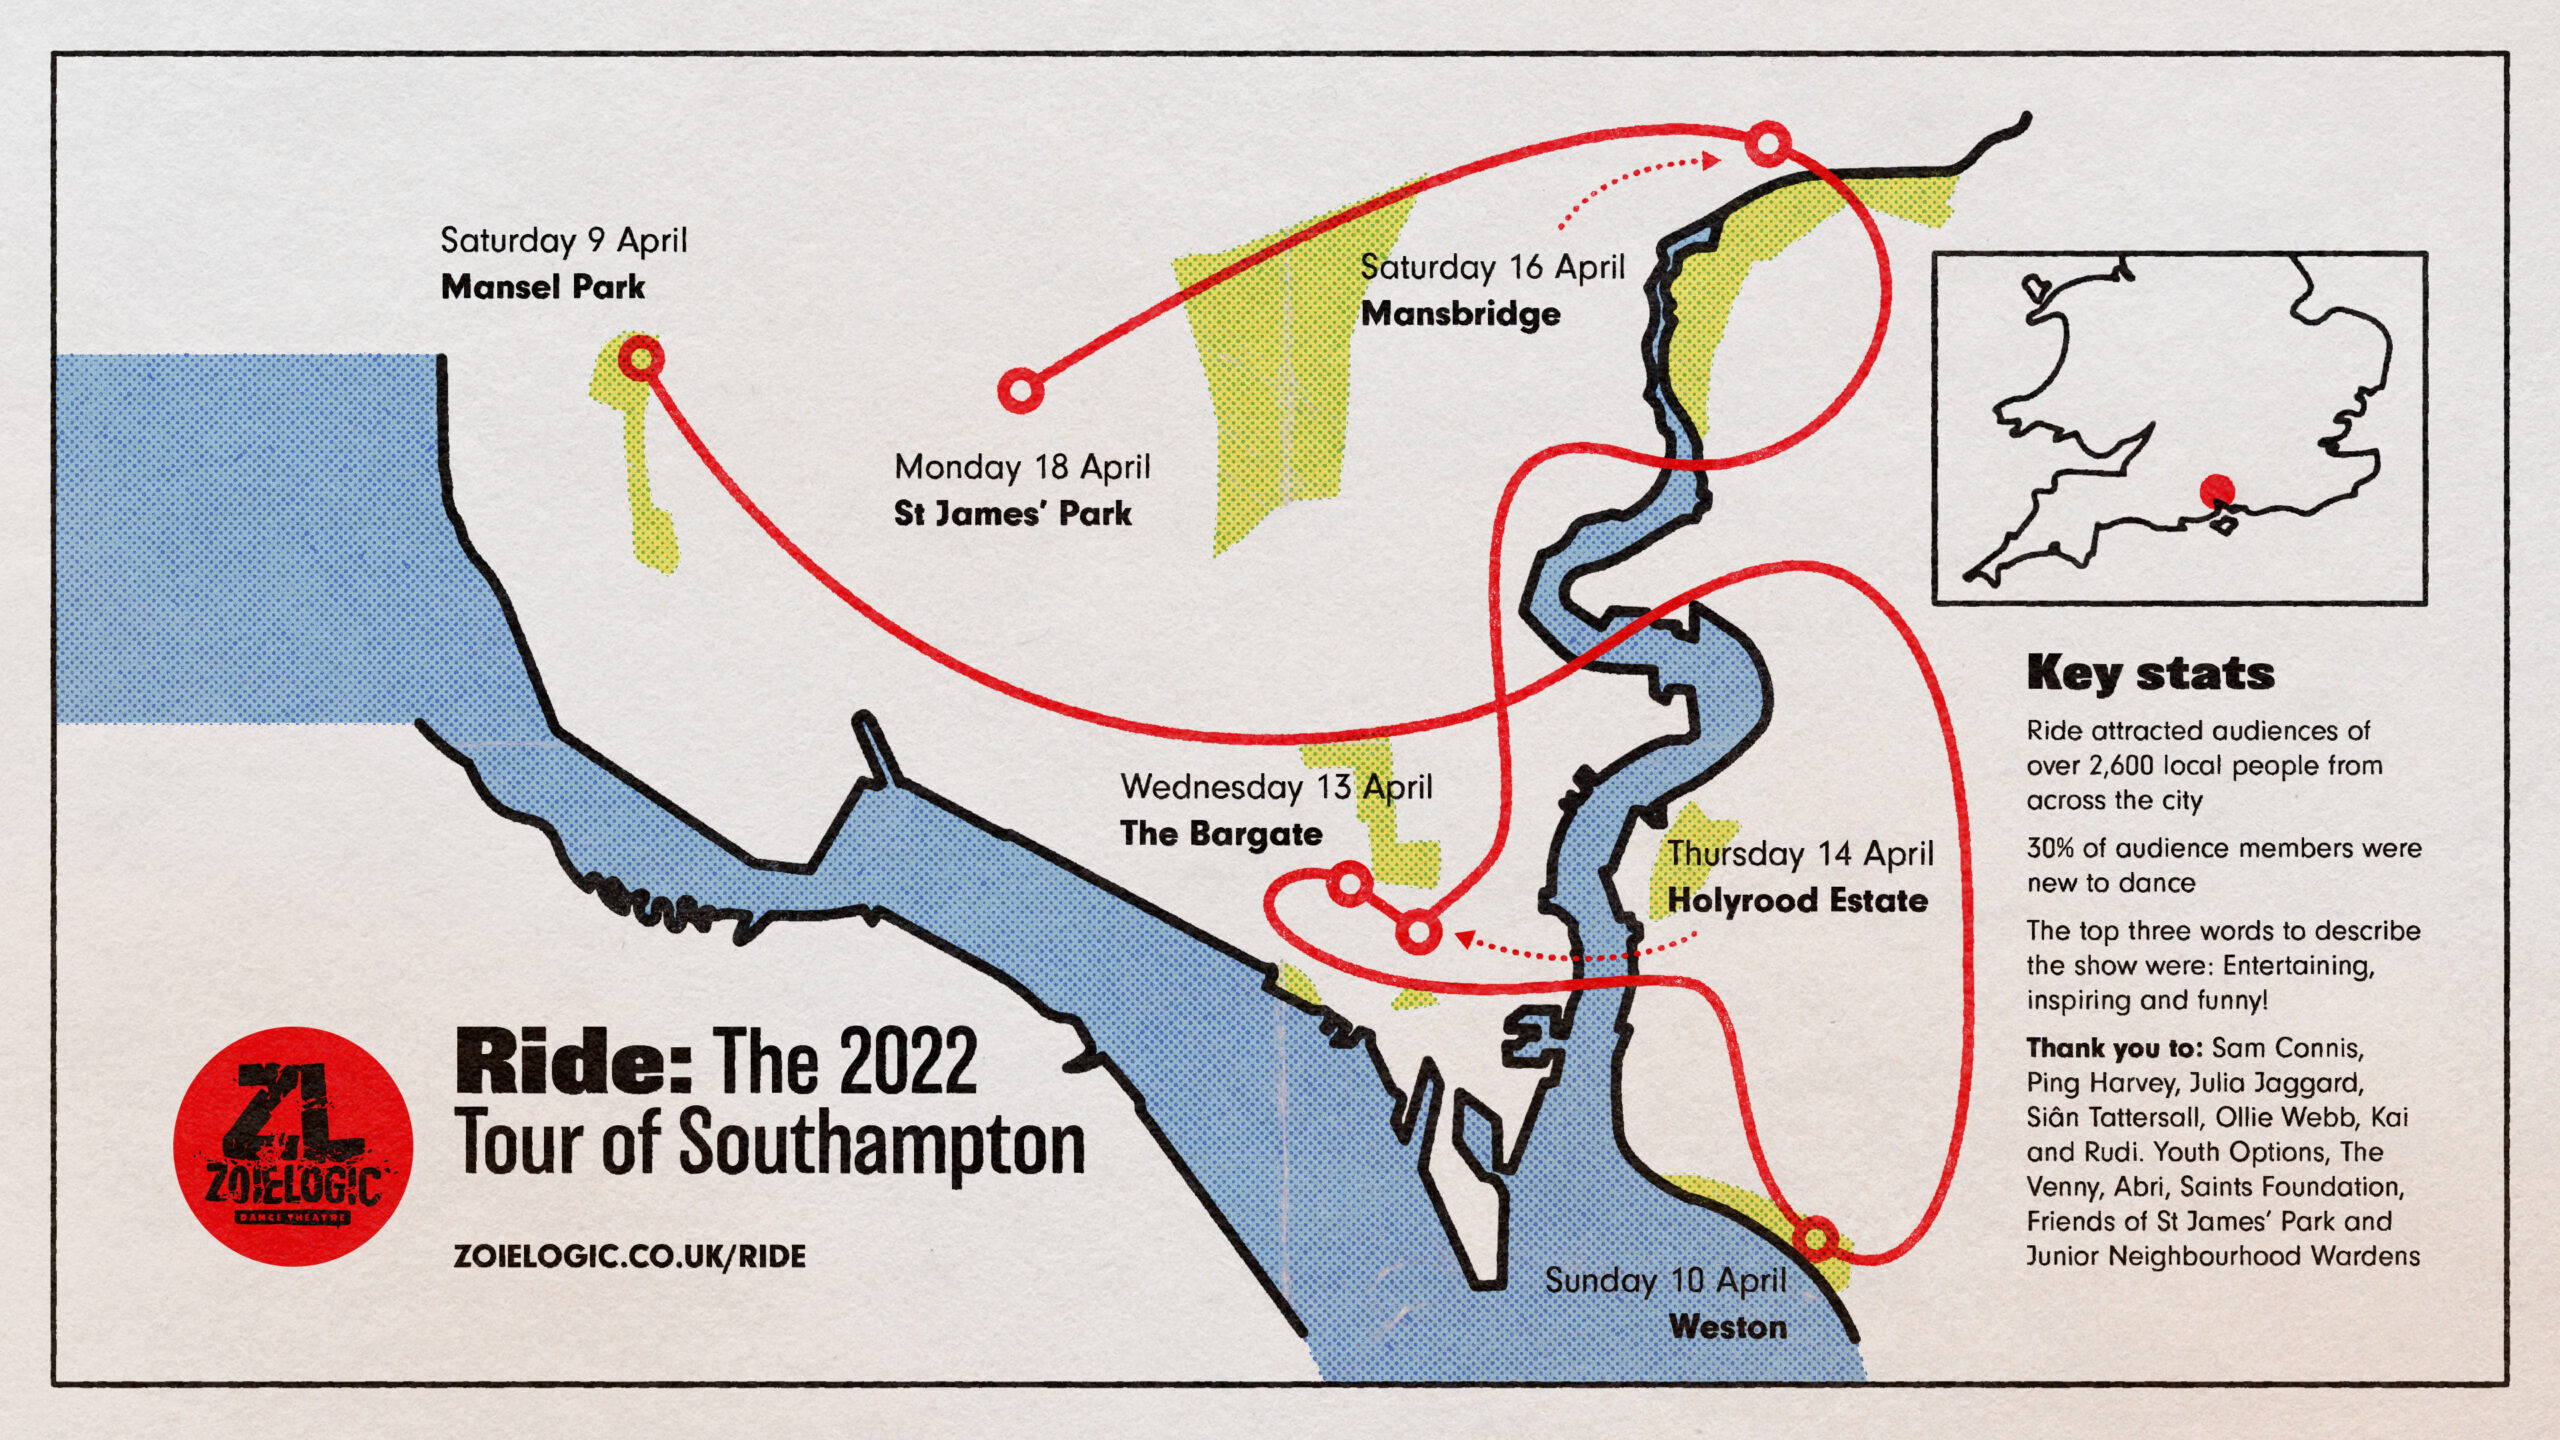 This image depicts a map of Southampton and the route that ZoieLogic Dance Theatre's outdoor show, Ride went on during its 2022 tour